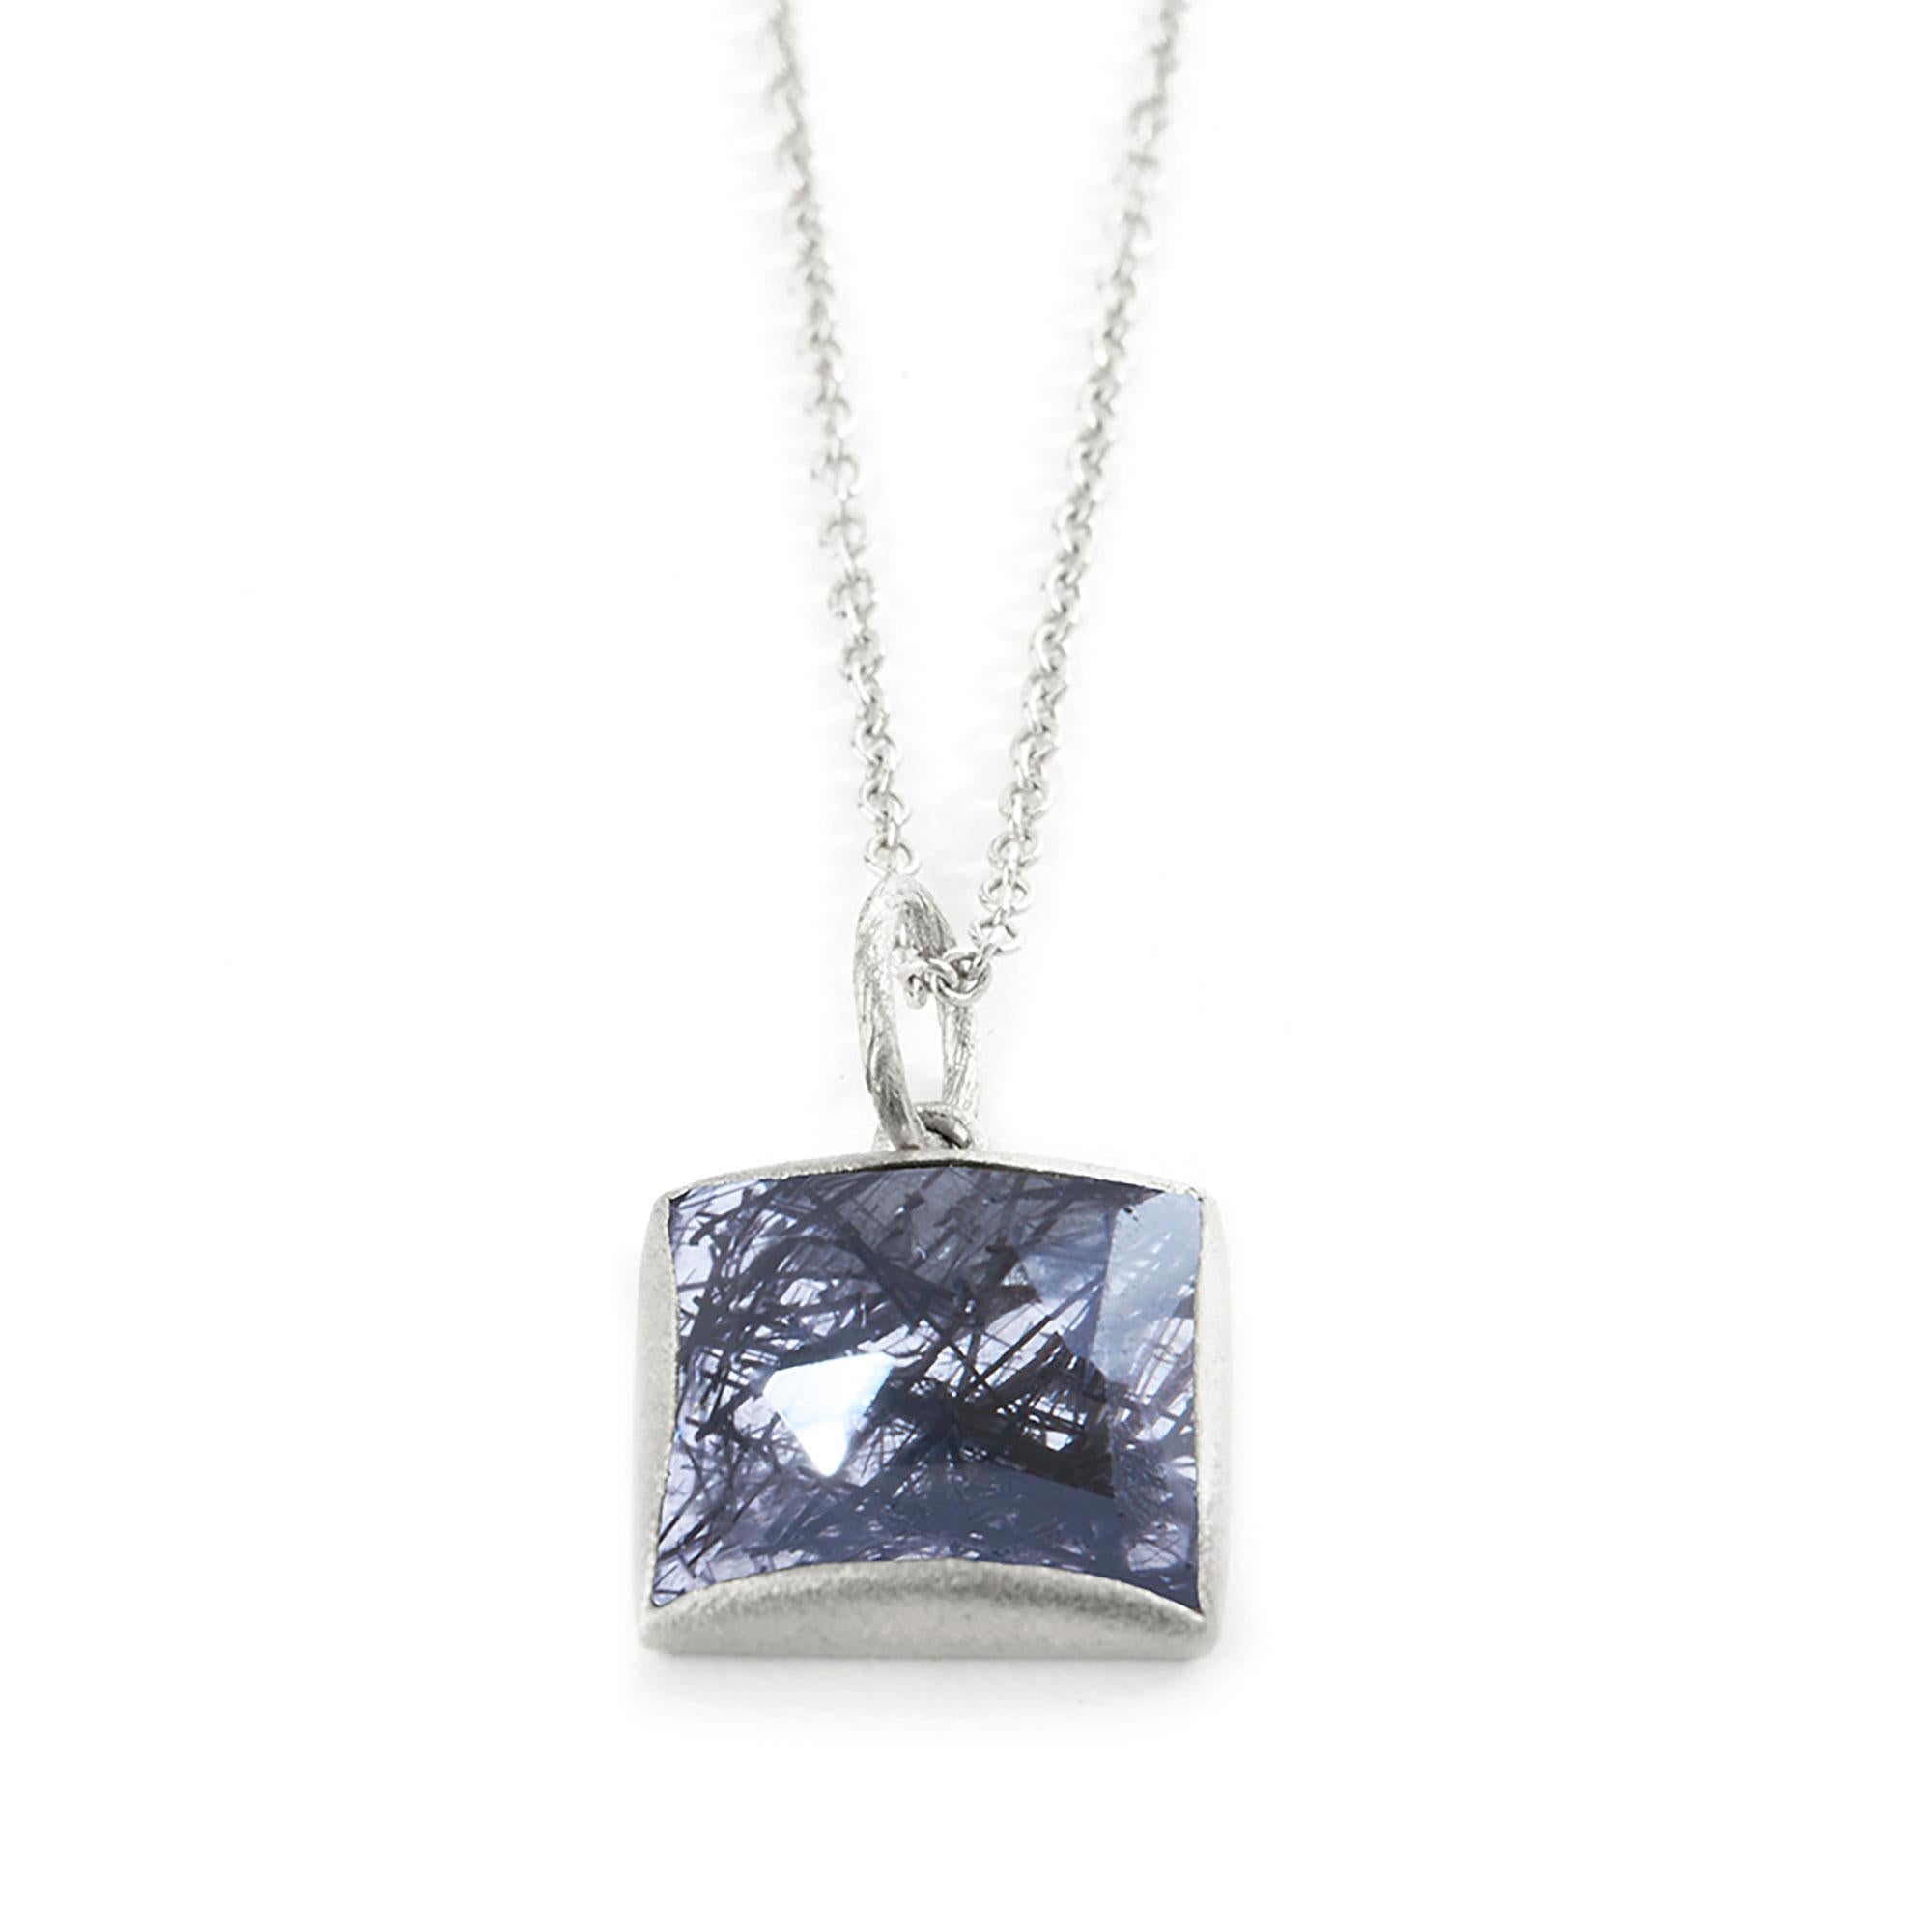 Uplift your look: Designed with a square-shaped black tourmalated quartz pendant, the Spirit Silver Necklace goes with everything in your close

Metal: Sterling Silver
Stone carat: 4.2
Length: 16-18''
Stone size: 10mm

About The Stones:
Genuine